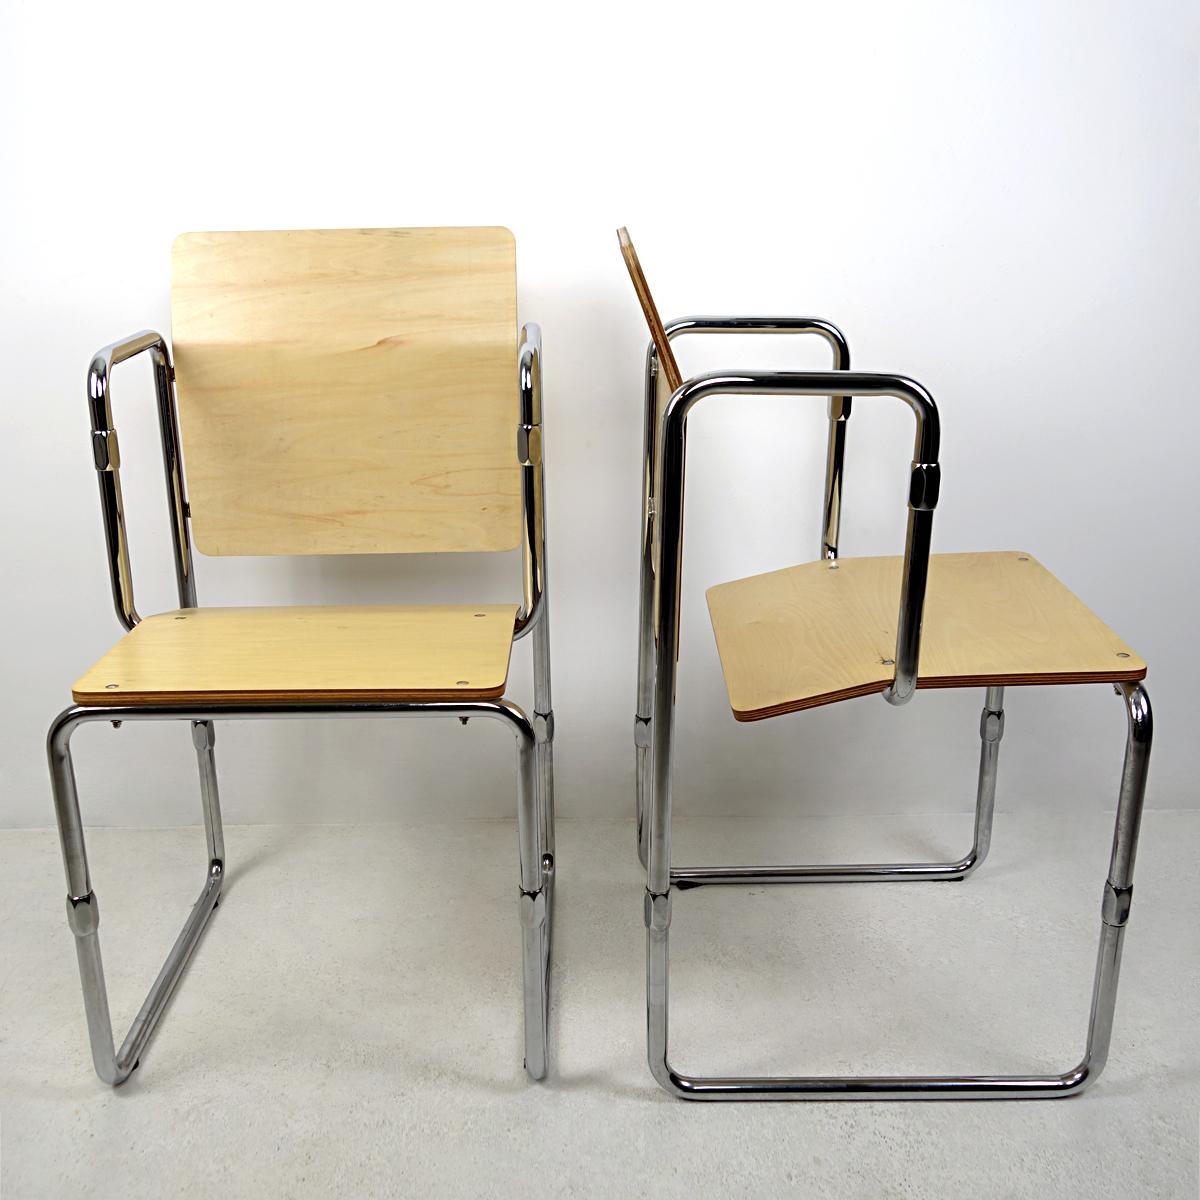 Modernist Hopmi Chair by Gerrit Rietveld Limited Edition Official Reproduction 8